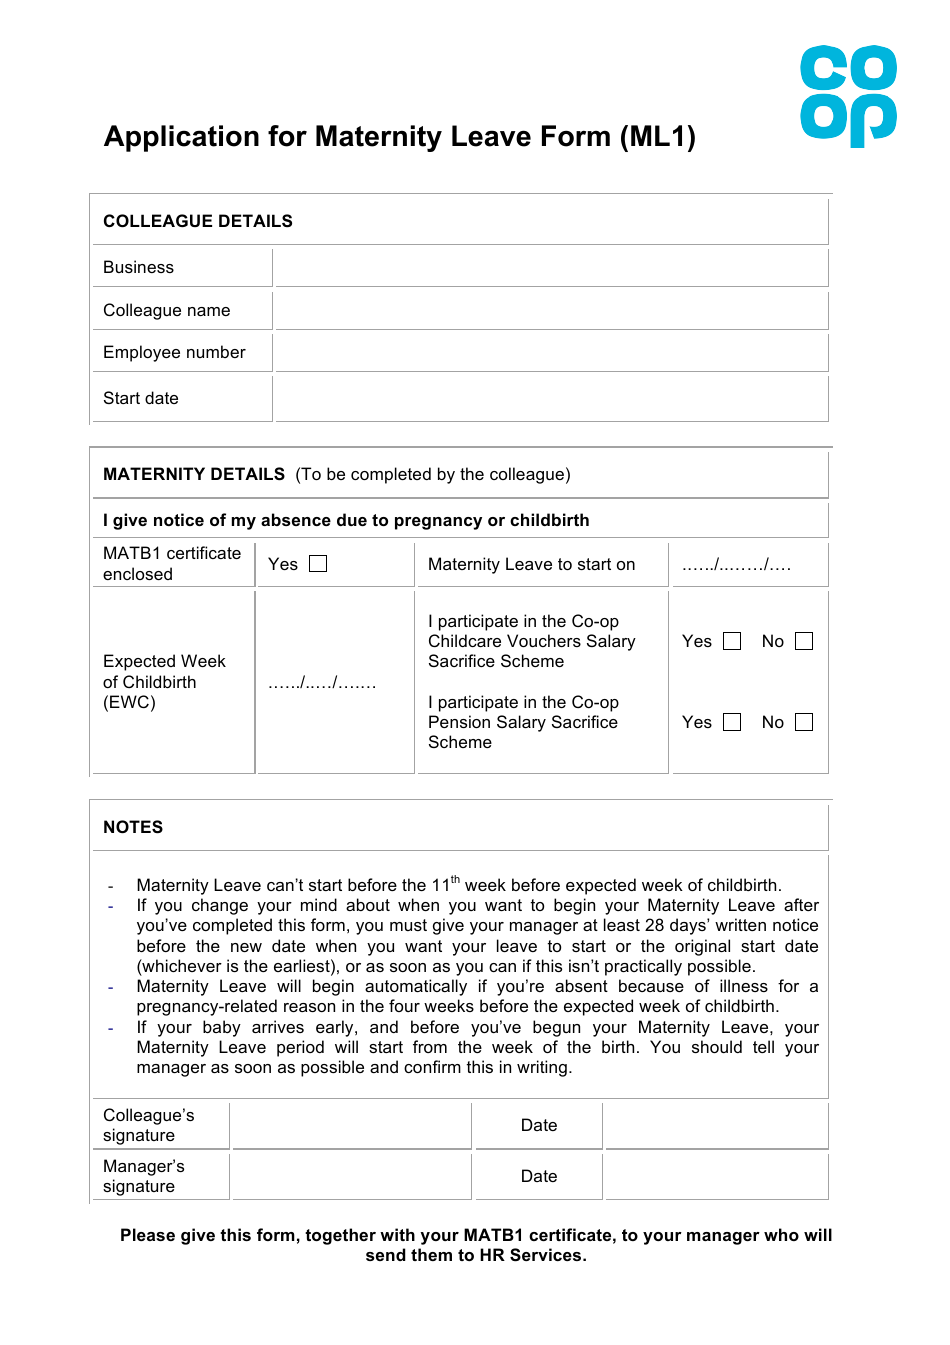 Application For Maternity Leave Form Co op Download Printable PDF 